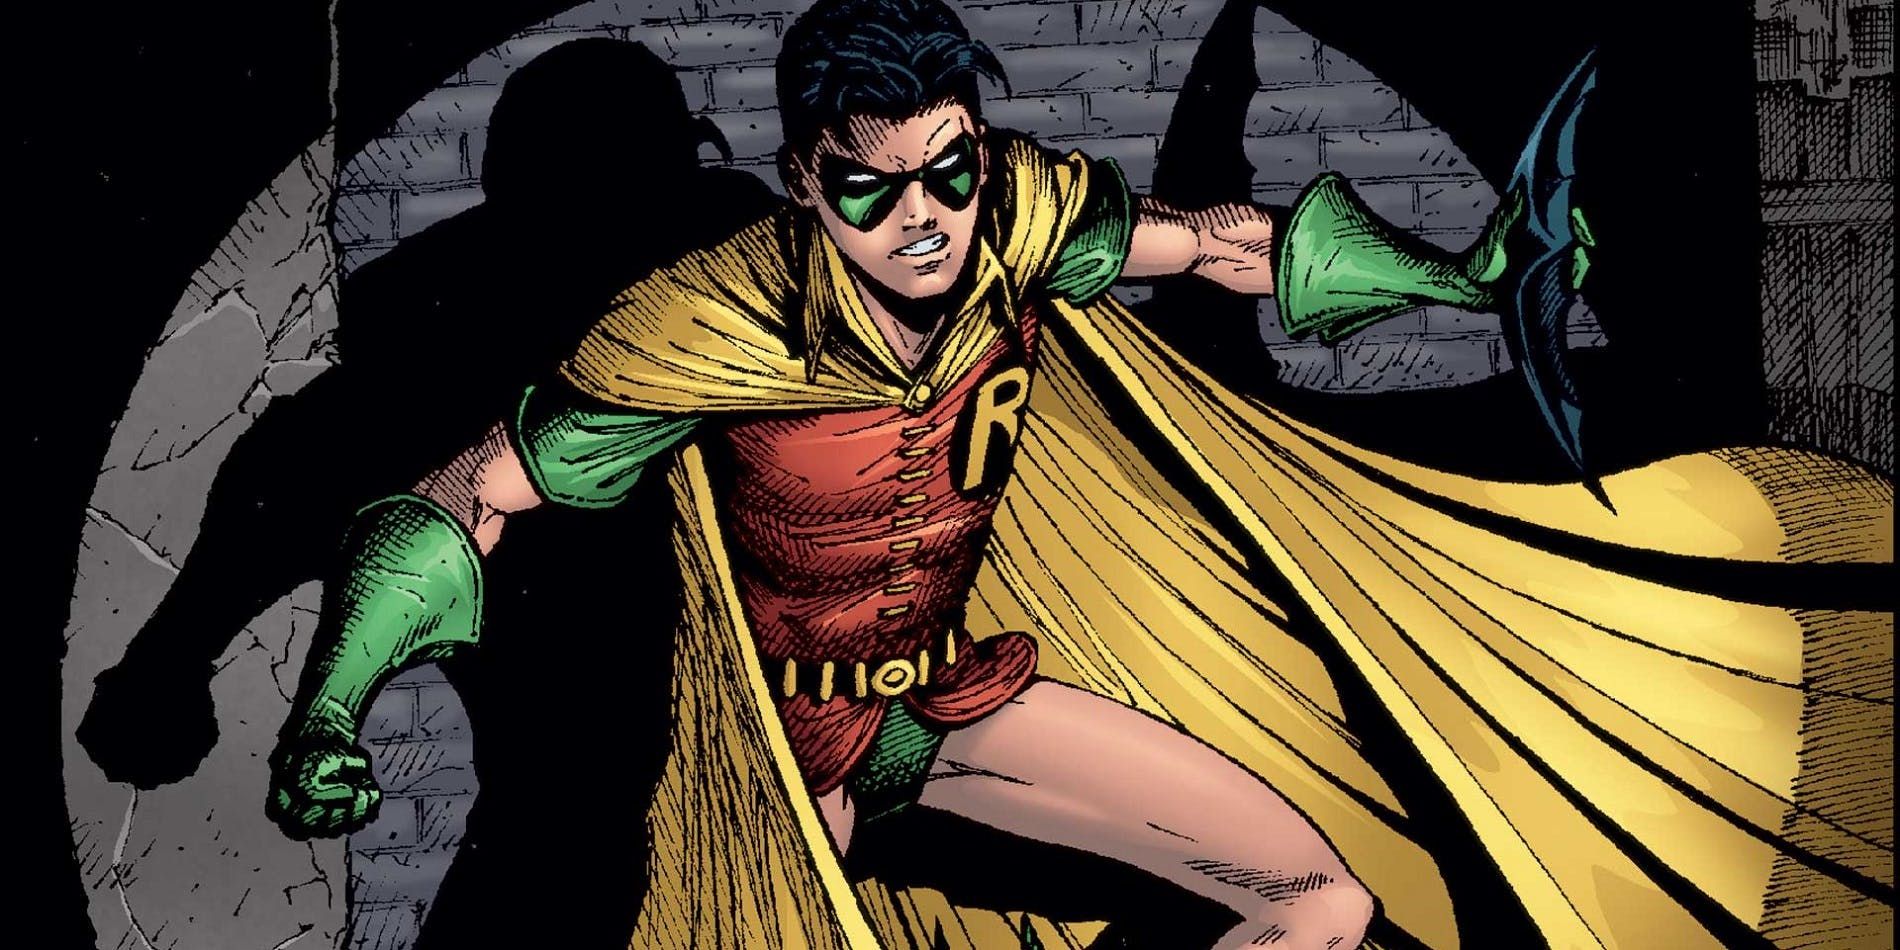 Dick Grayson as Robin from DC Comics